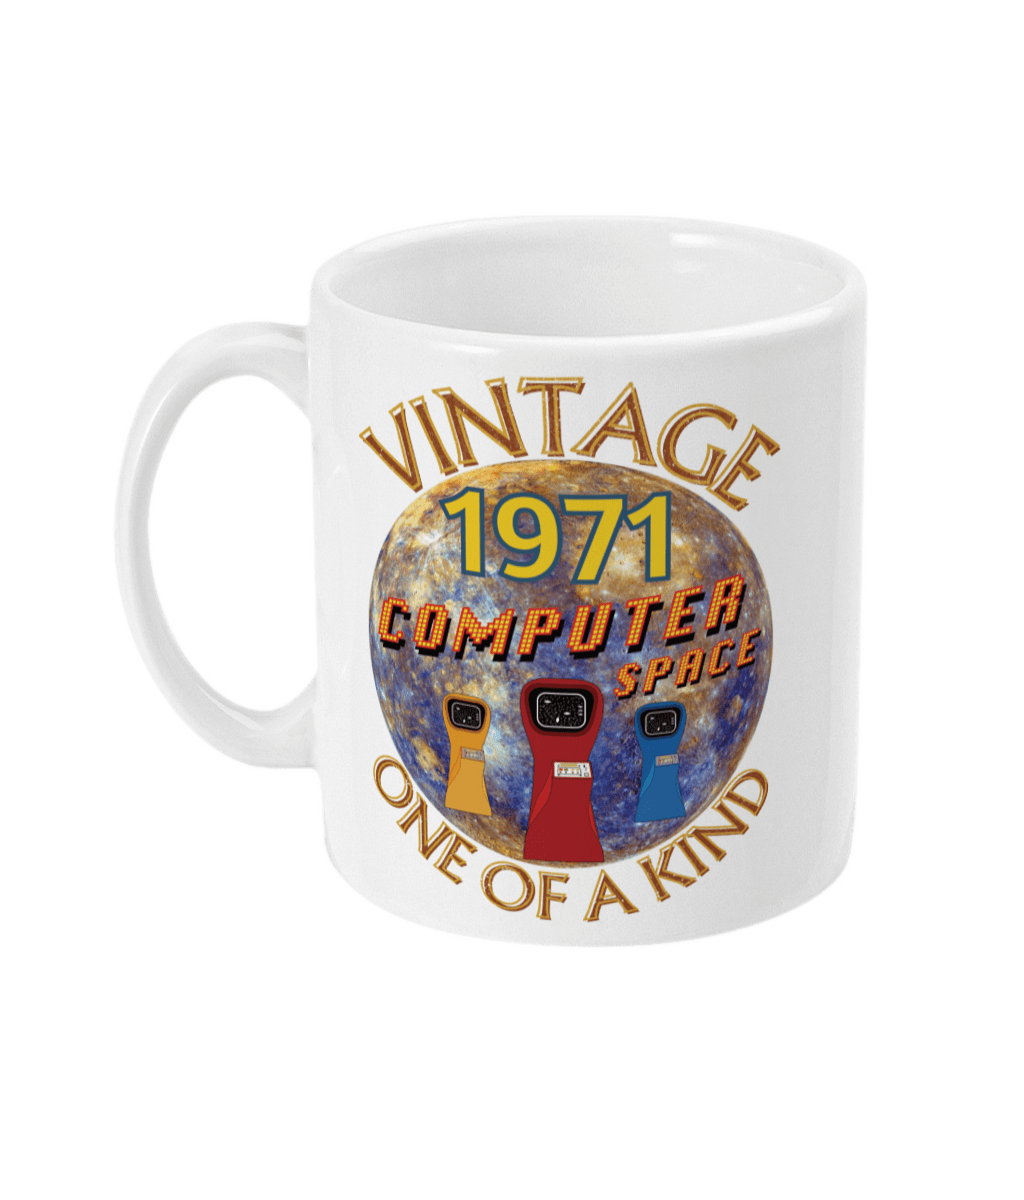 White mug with the words vintage,1971,computer space,one of a kind,large earth, 3 computer space arcade game machines